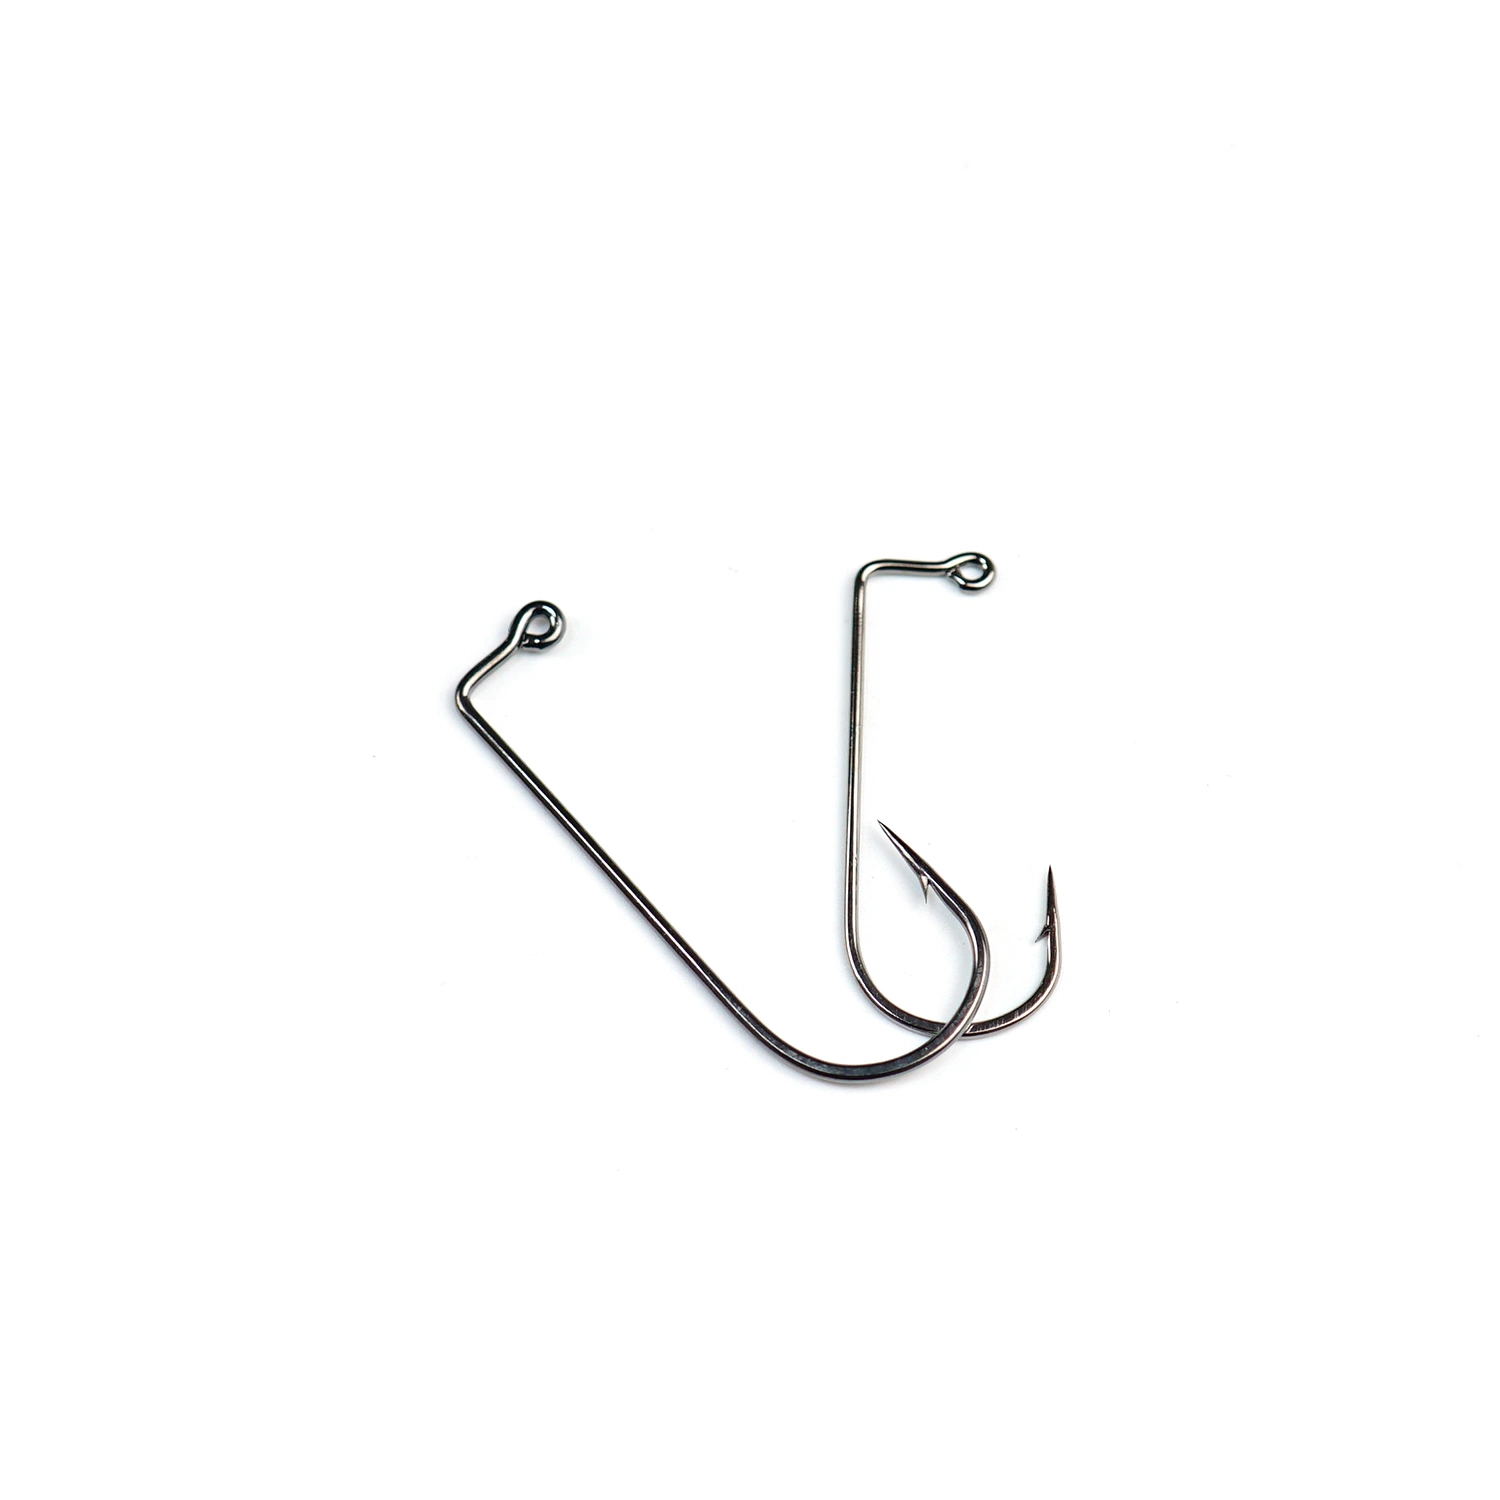 China OEM Metal Fabrication Factory Custom Wire Bending Forming Spring Parts Various Hardware Products Stainless Steel Fishing Hook